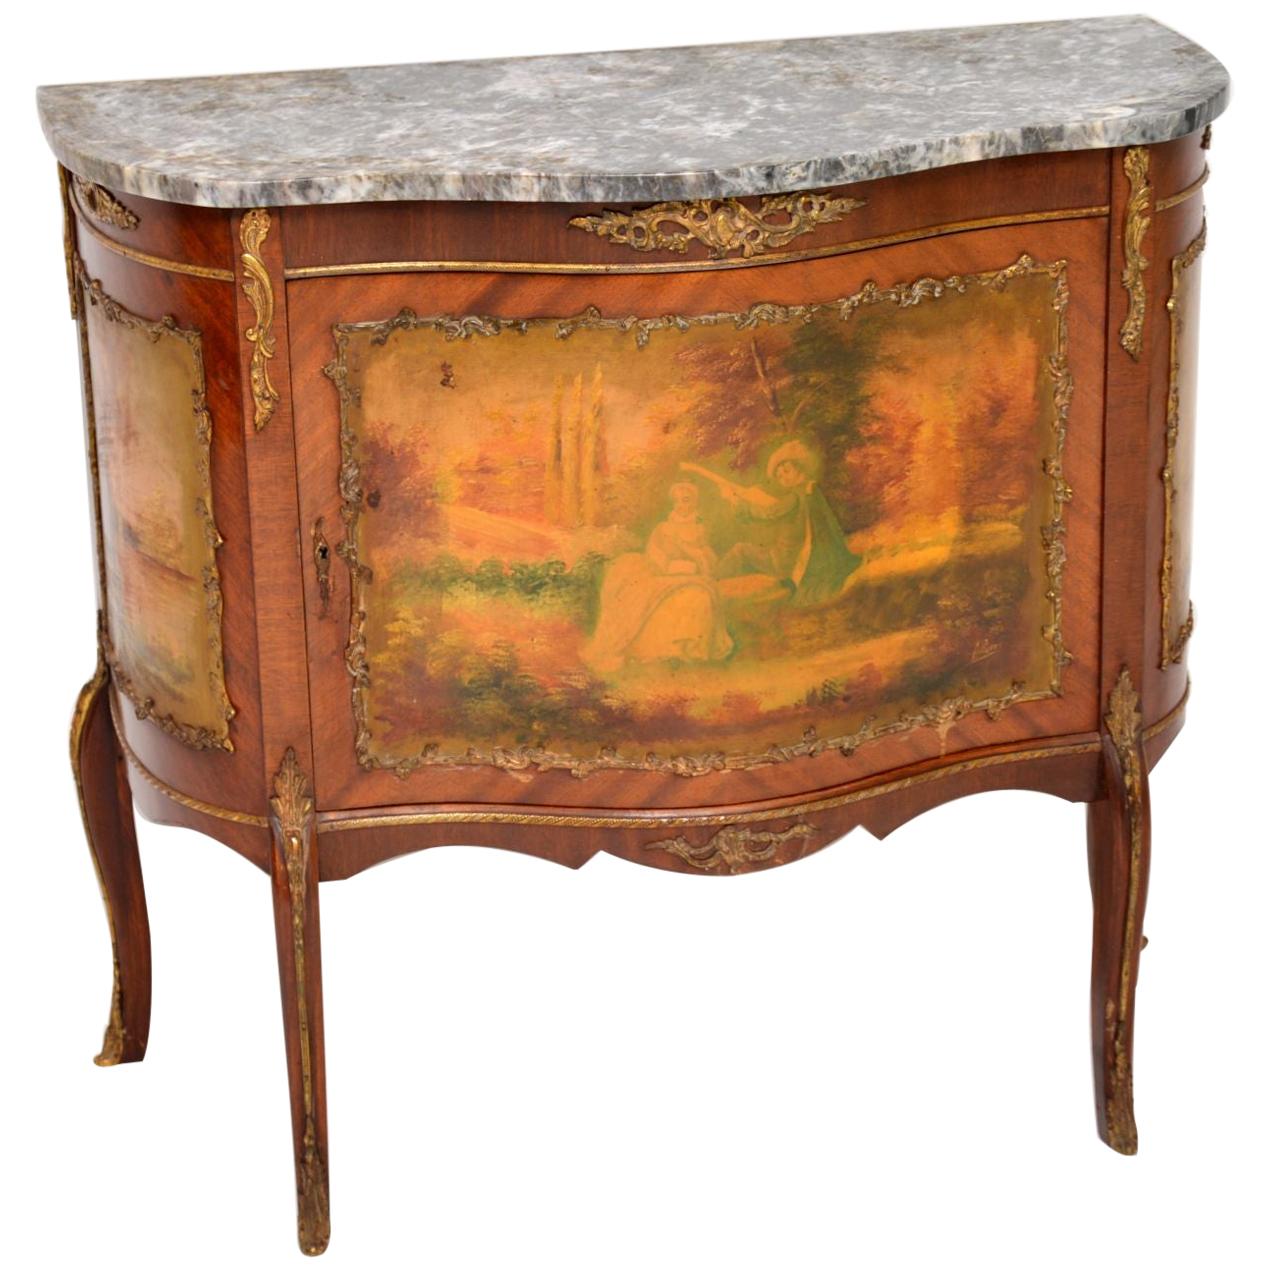 Antique French Marble-Top Painted Cabinet